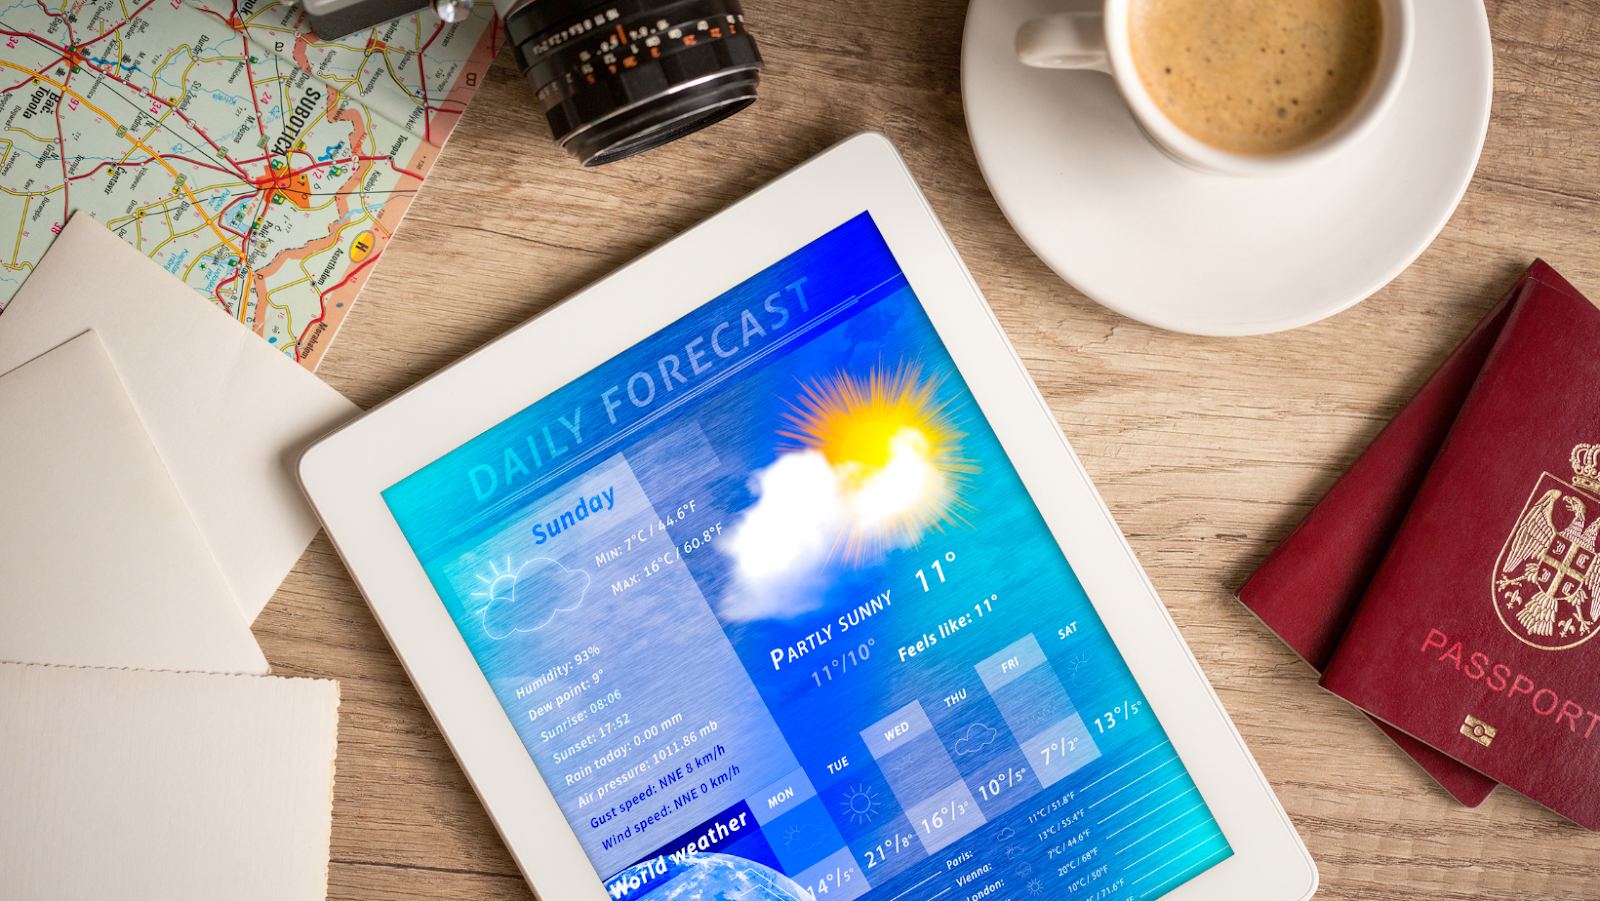 A weather app opened on a tablet